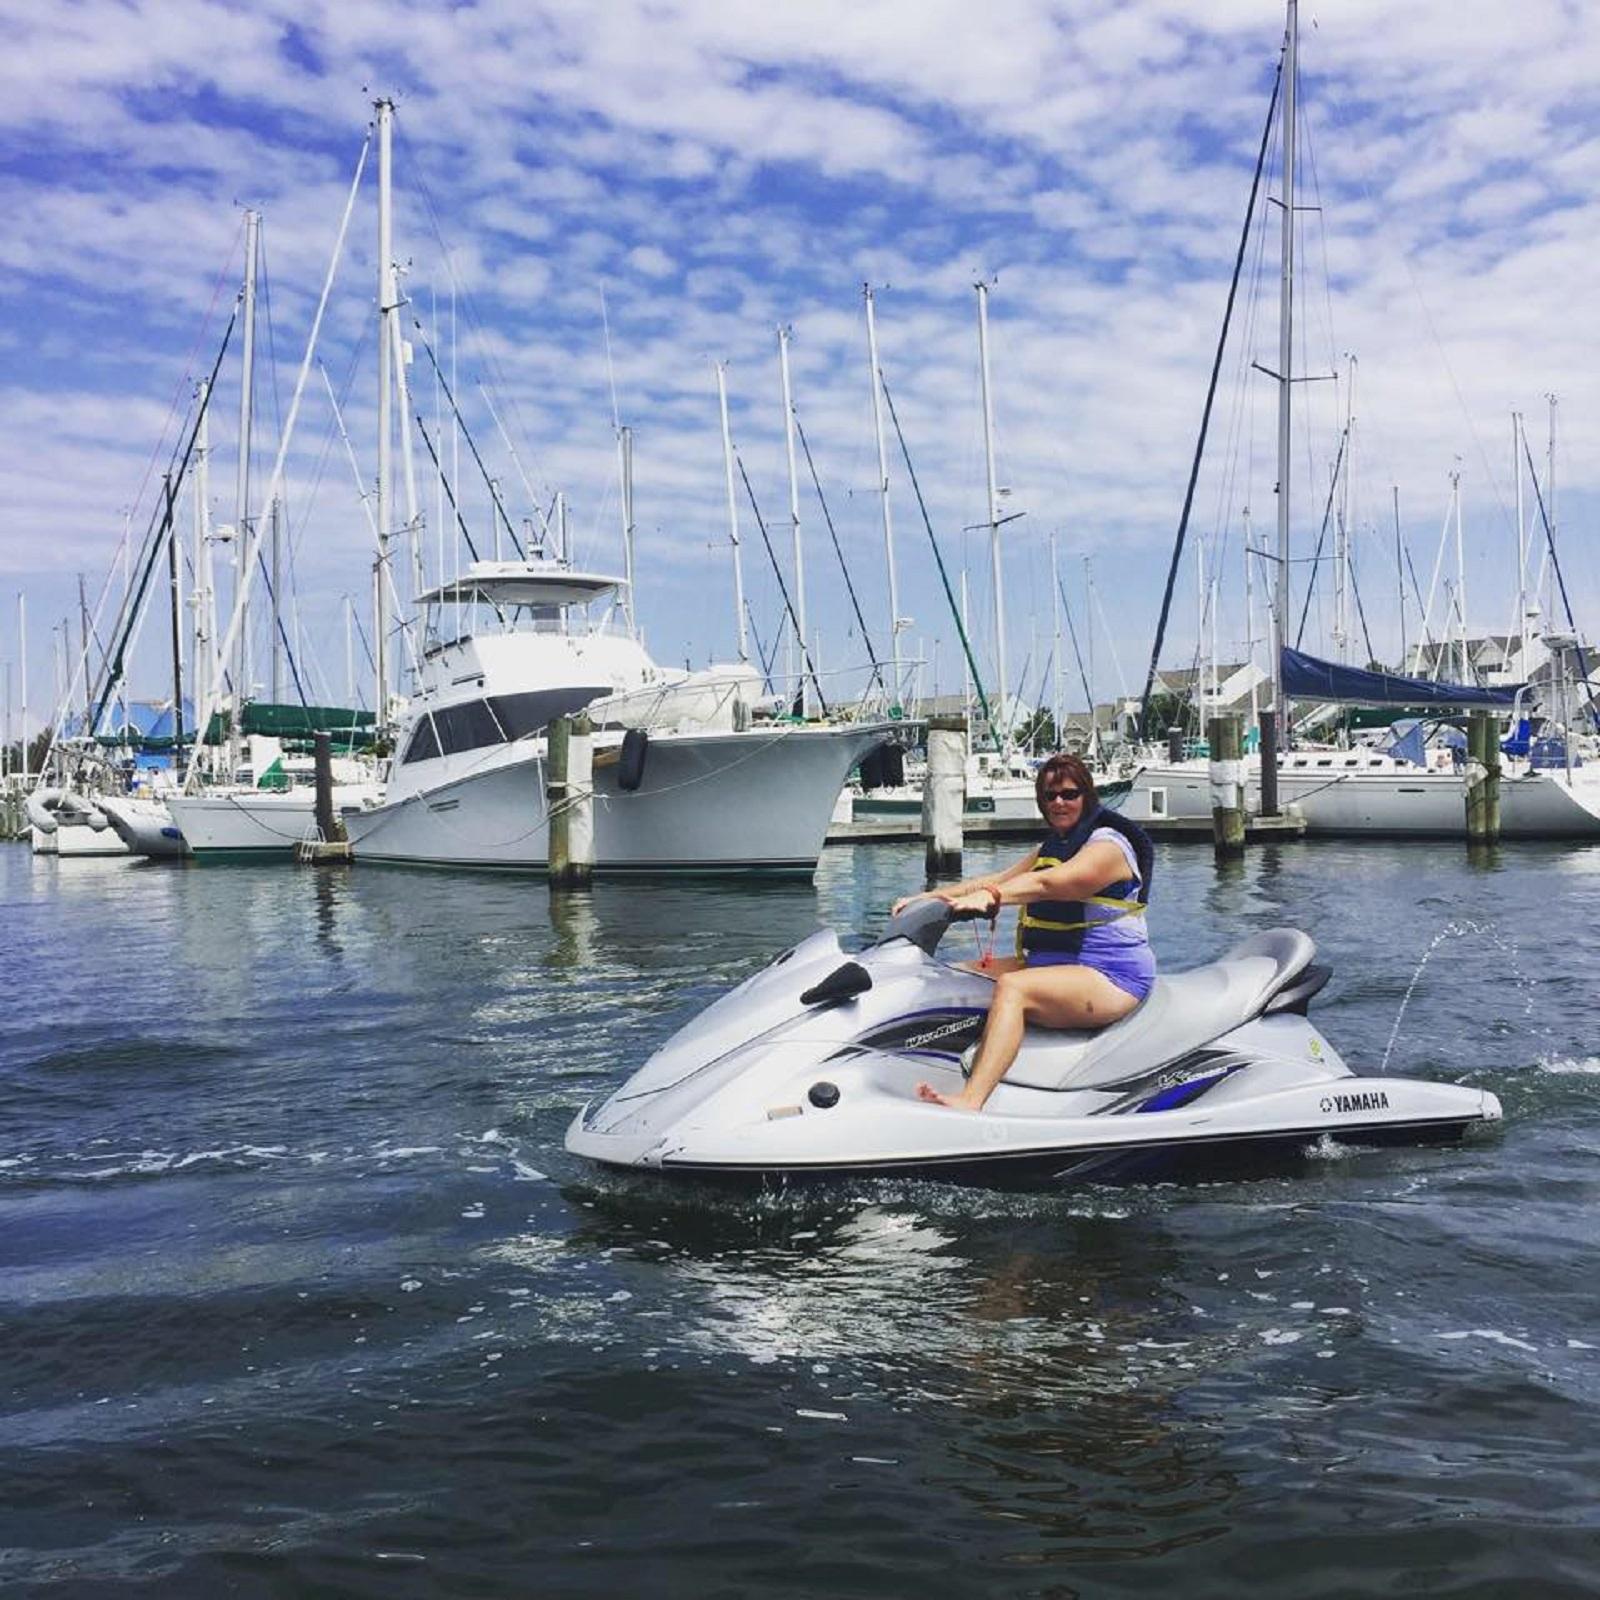 Great White Water Sports Jet Skis & Dolphin Tours